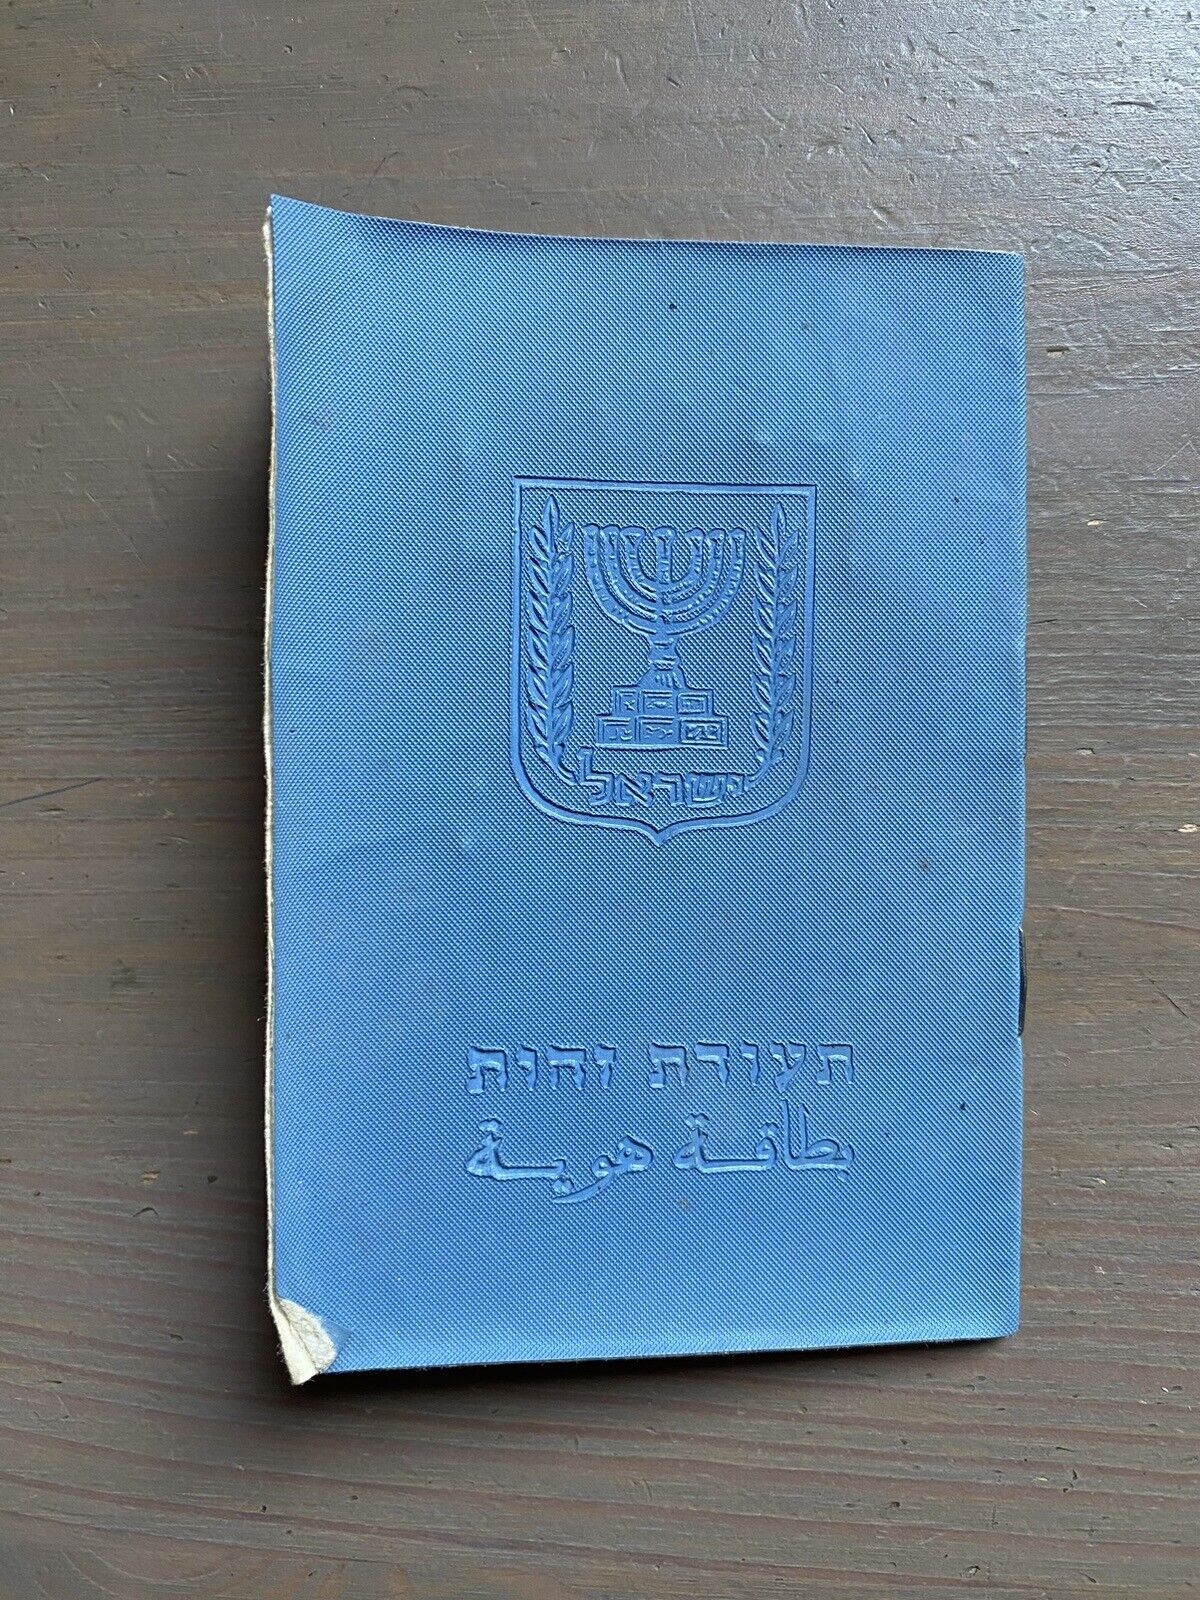 Old Israel ID Card Document With Photo 1960’s Cancelled